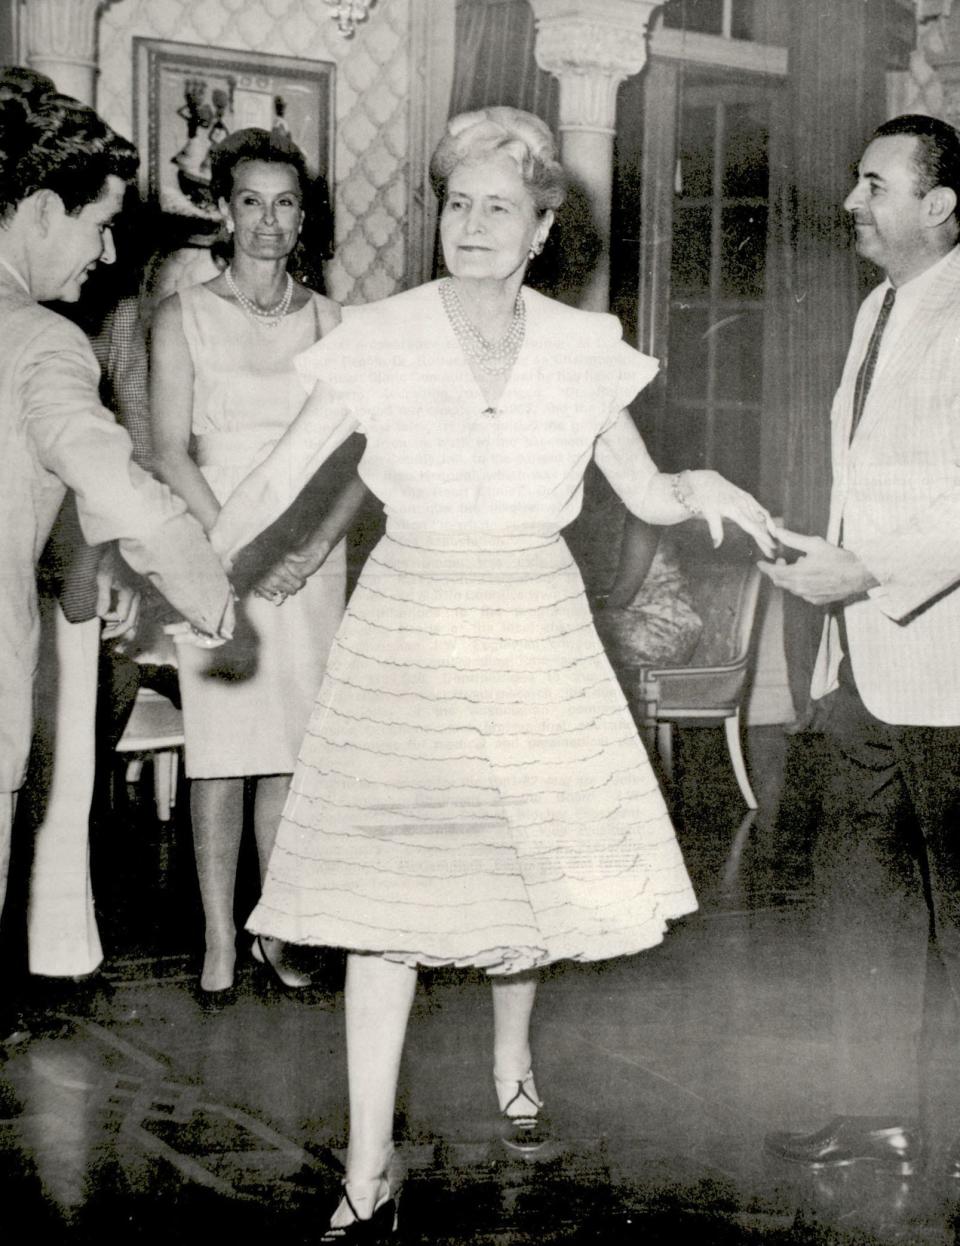 Marjorie Merriweather Post grew tired of the dinner-and-ballroom-dancing routine, so she she started hosting square dances.